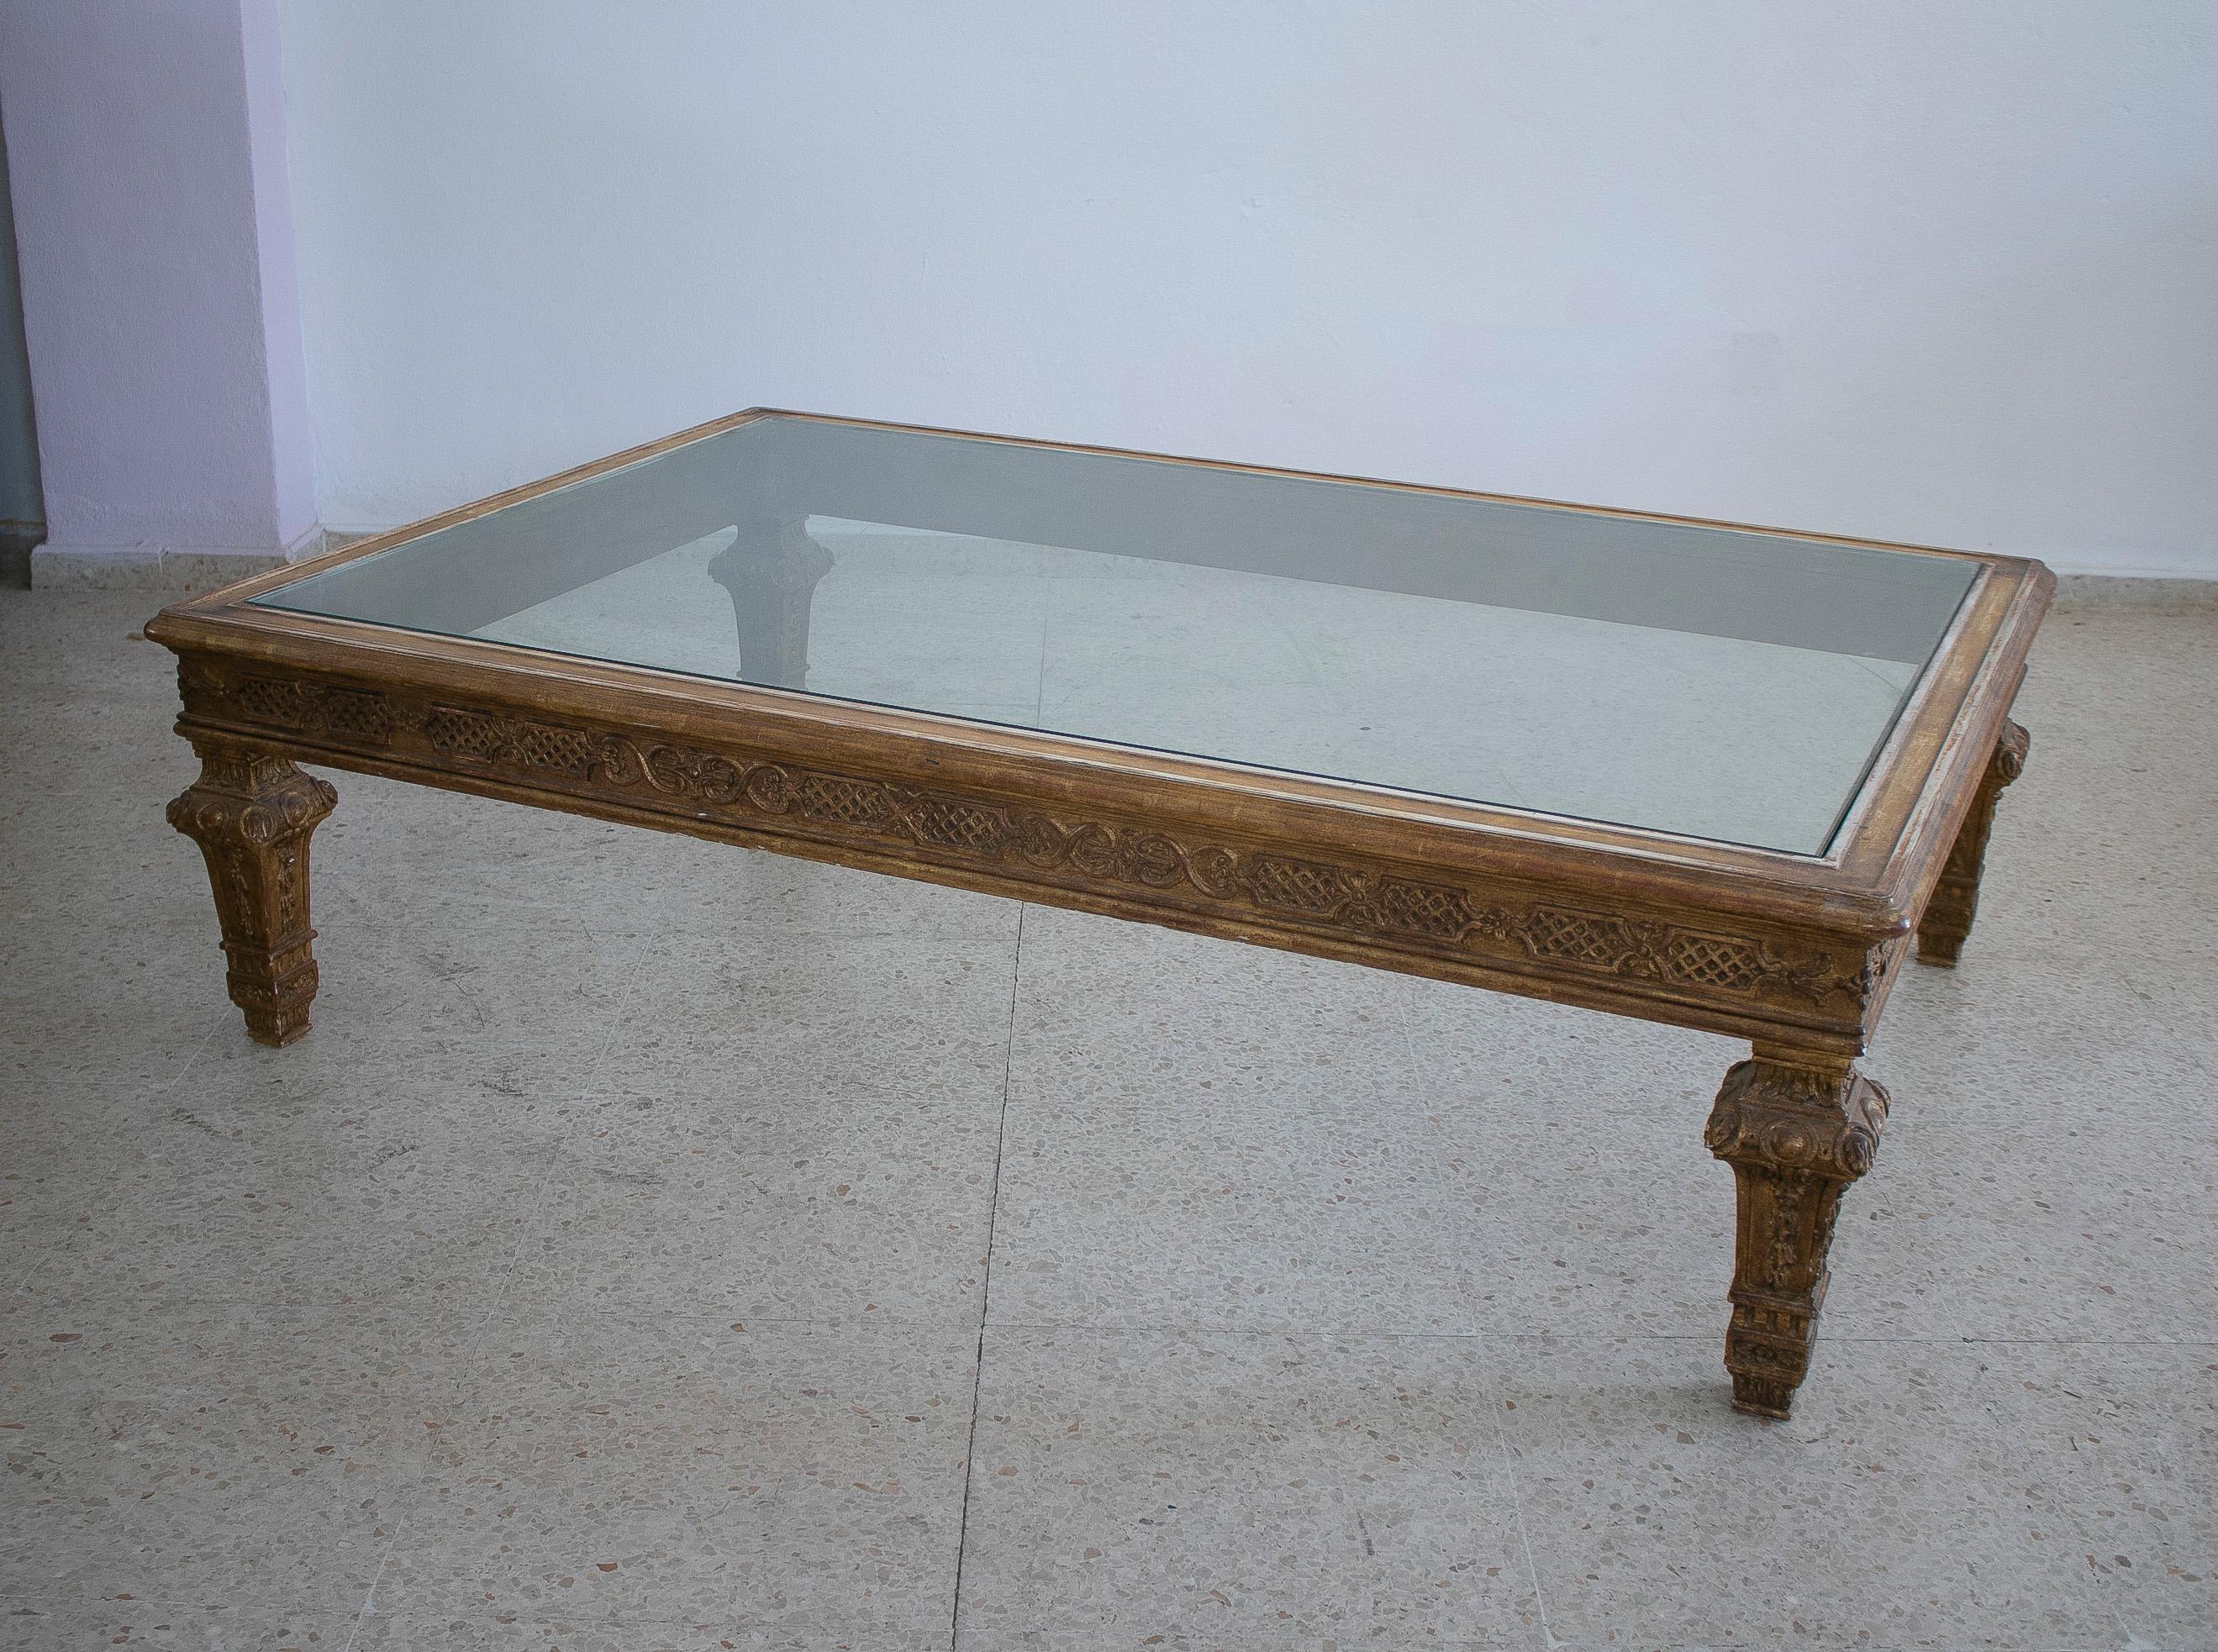 Vintage 1970s French giltwood coffee table with glass top.